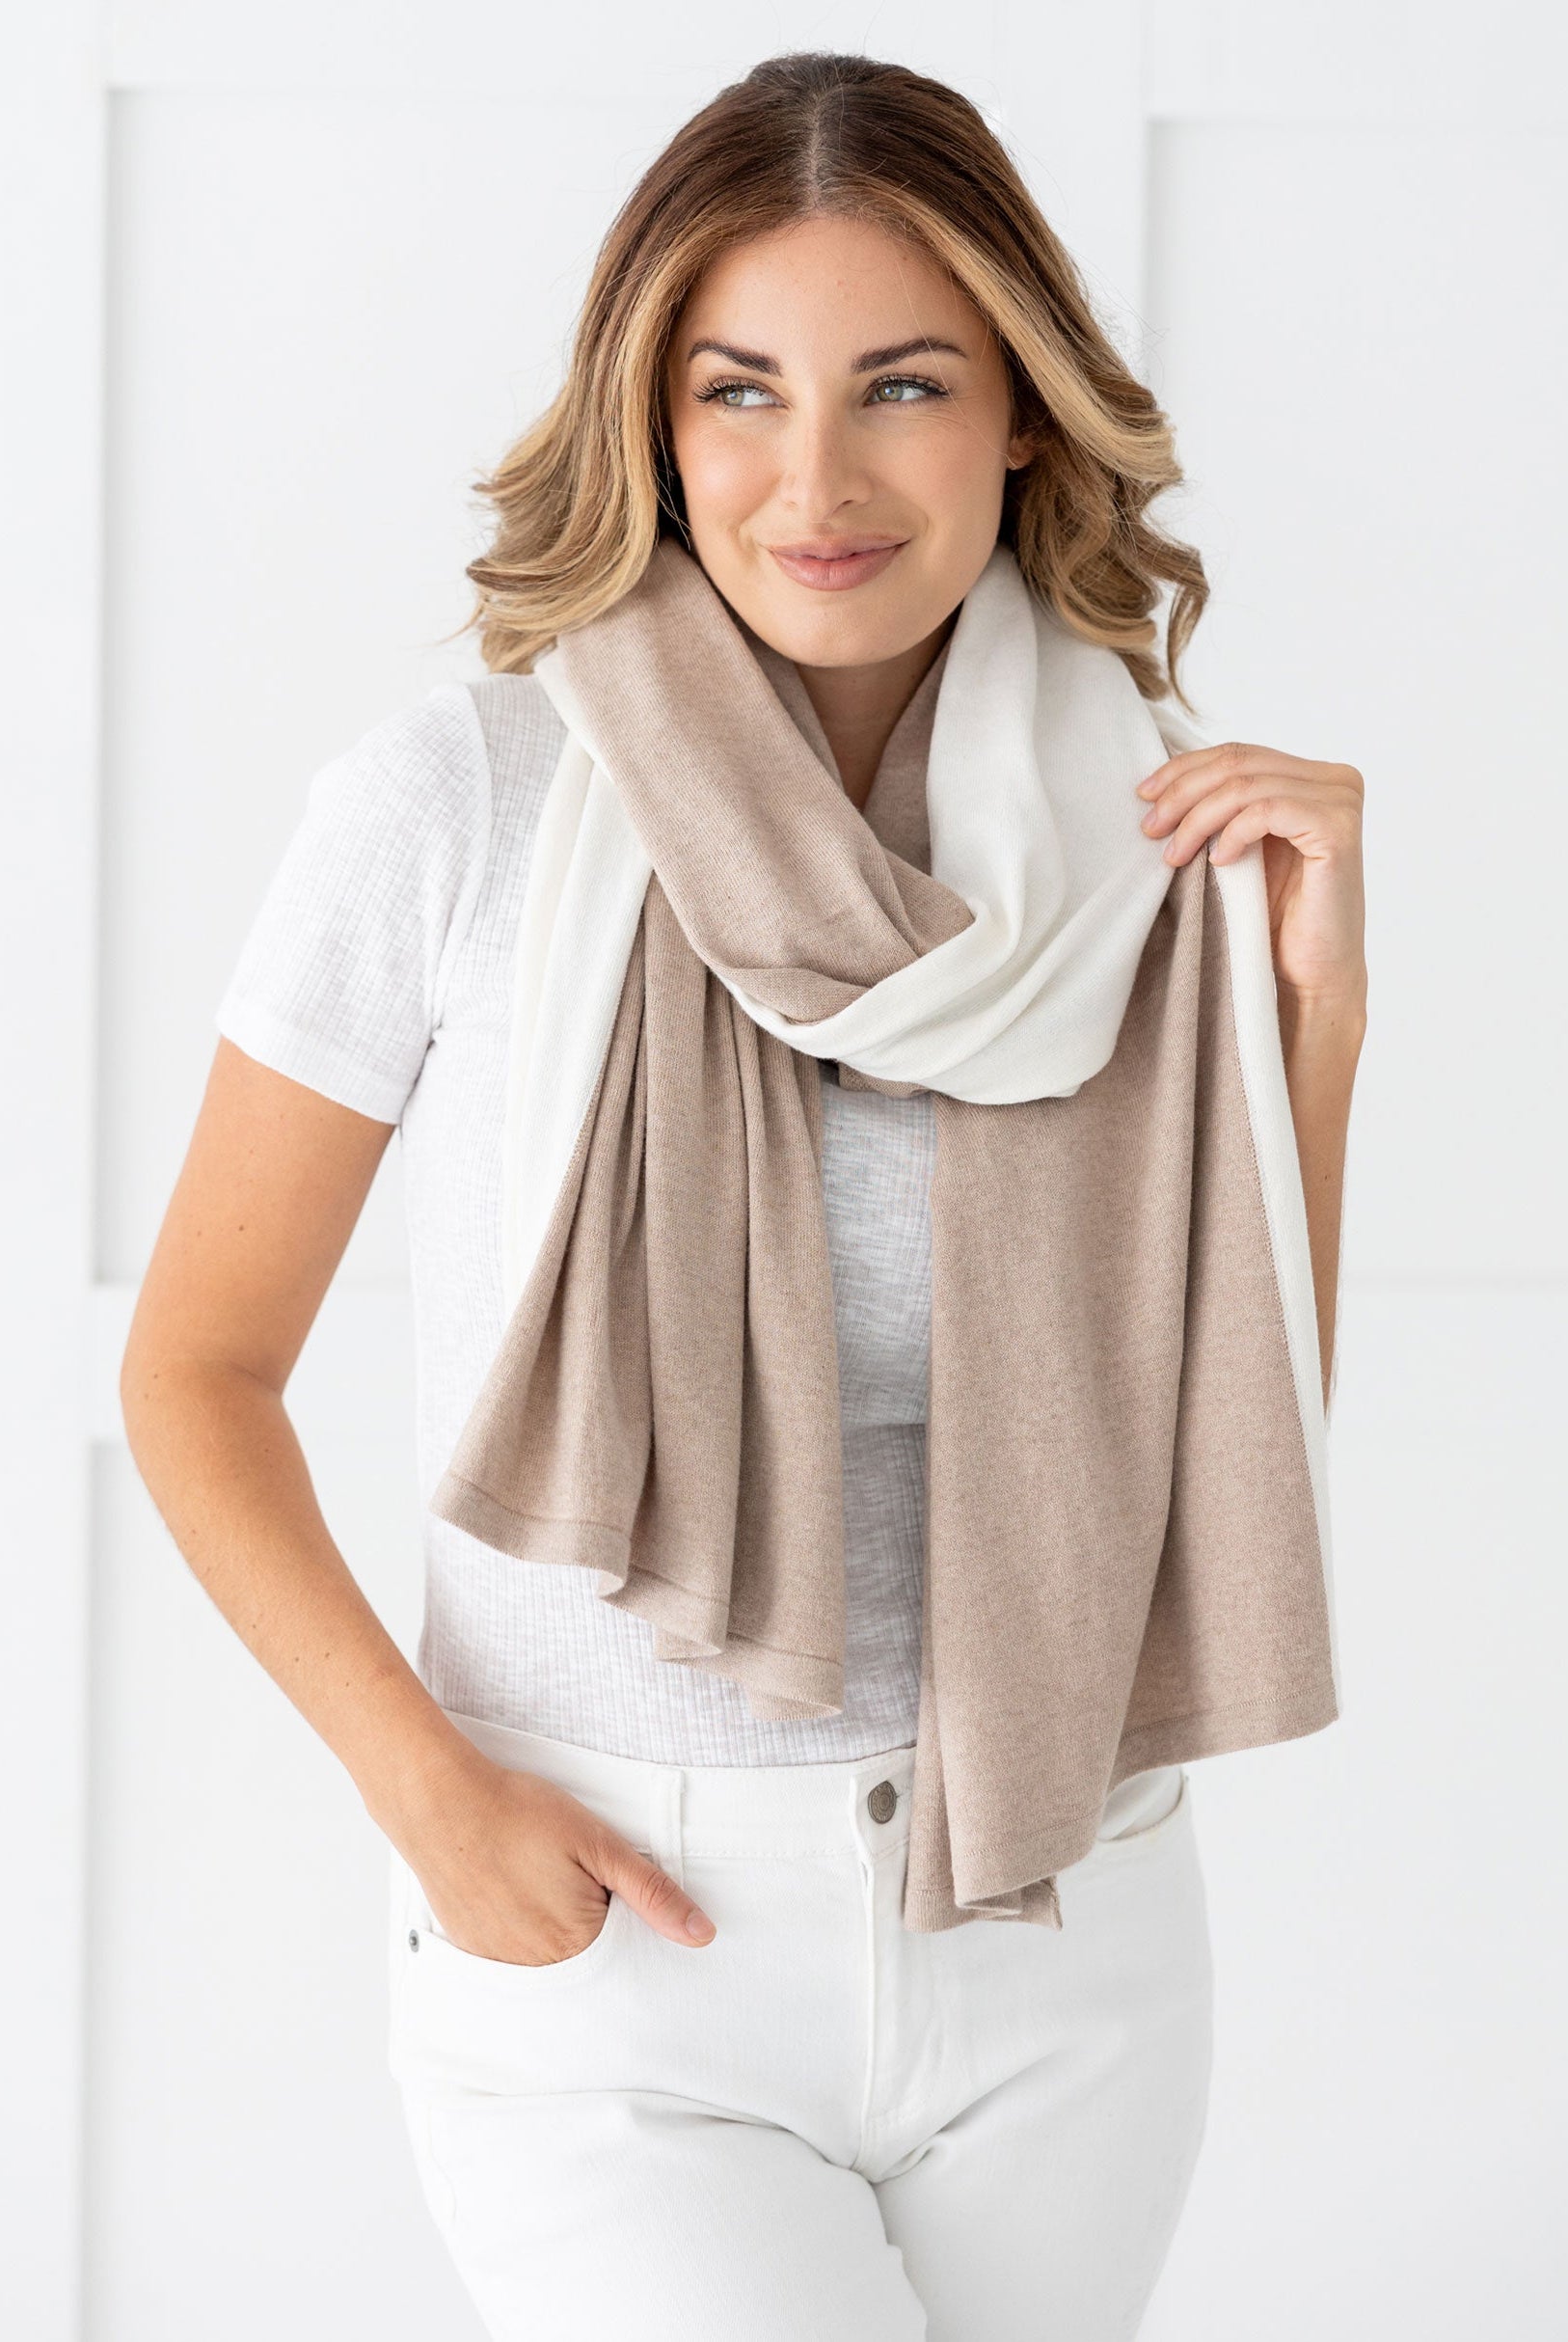 Woman wearing the Cashmere Cotton Luxe Travel Scarf in Sandstone and Ivory Colorblock which is a tan and cream scarf, worn as a modern loop style